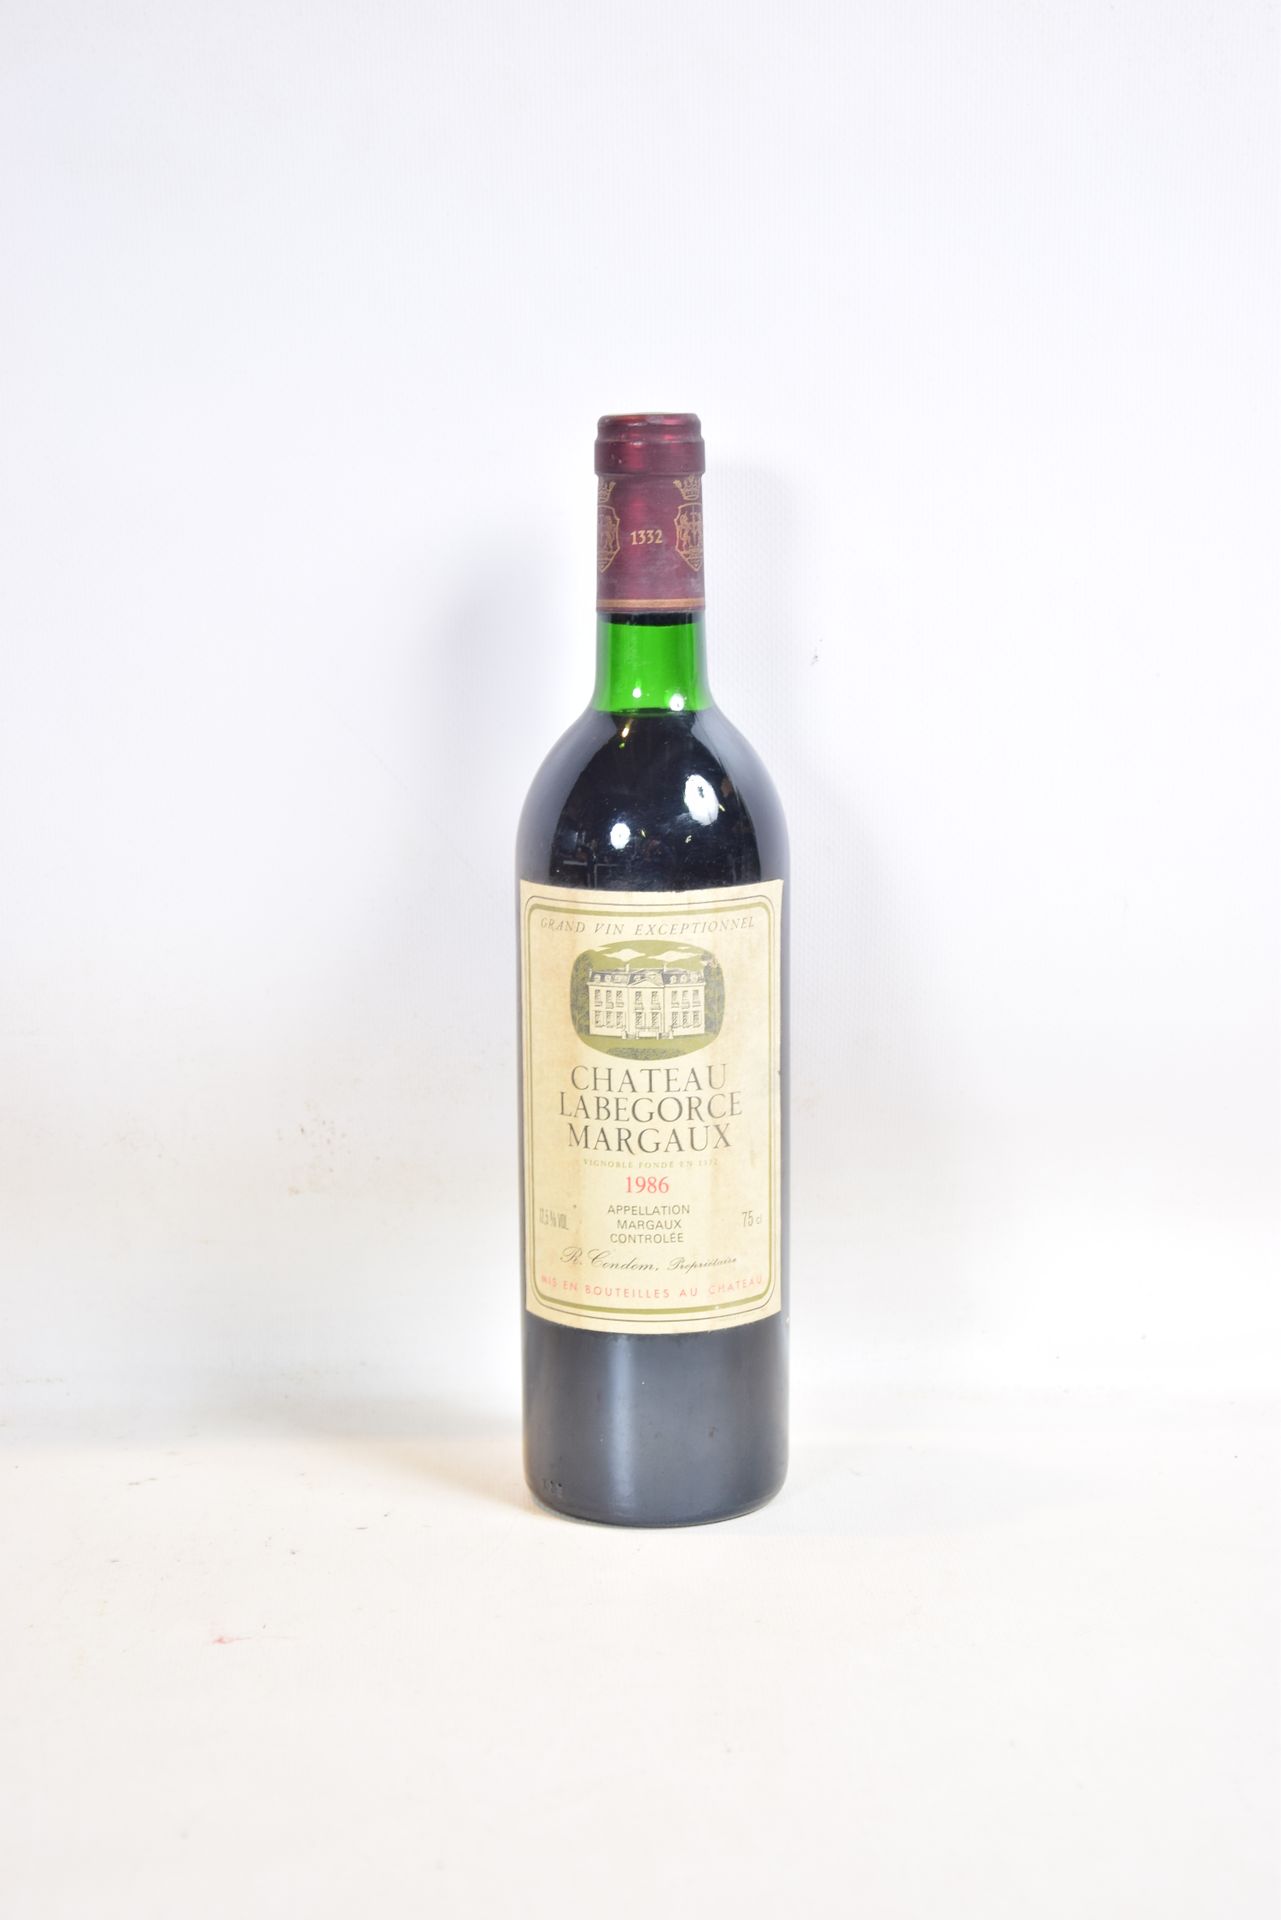 Null 1 Blle CH. LABÉGORCE Margaux 1986

	And. A little faded and stained. N: bor&hellip;